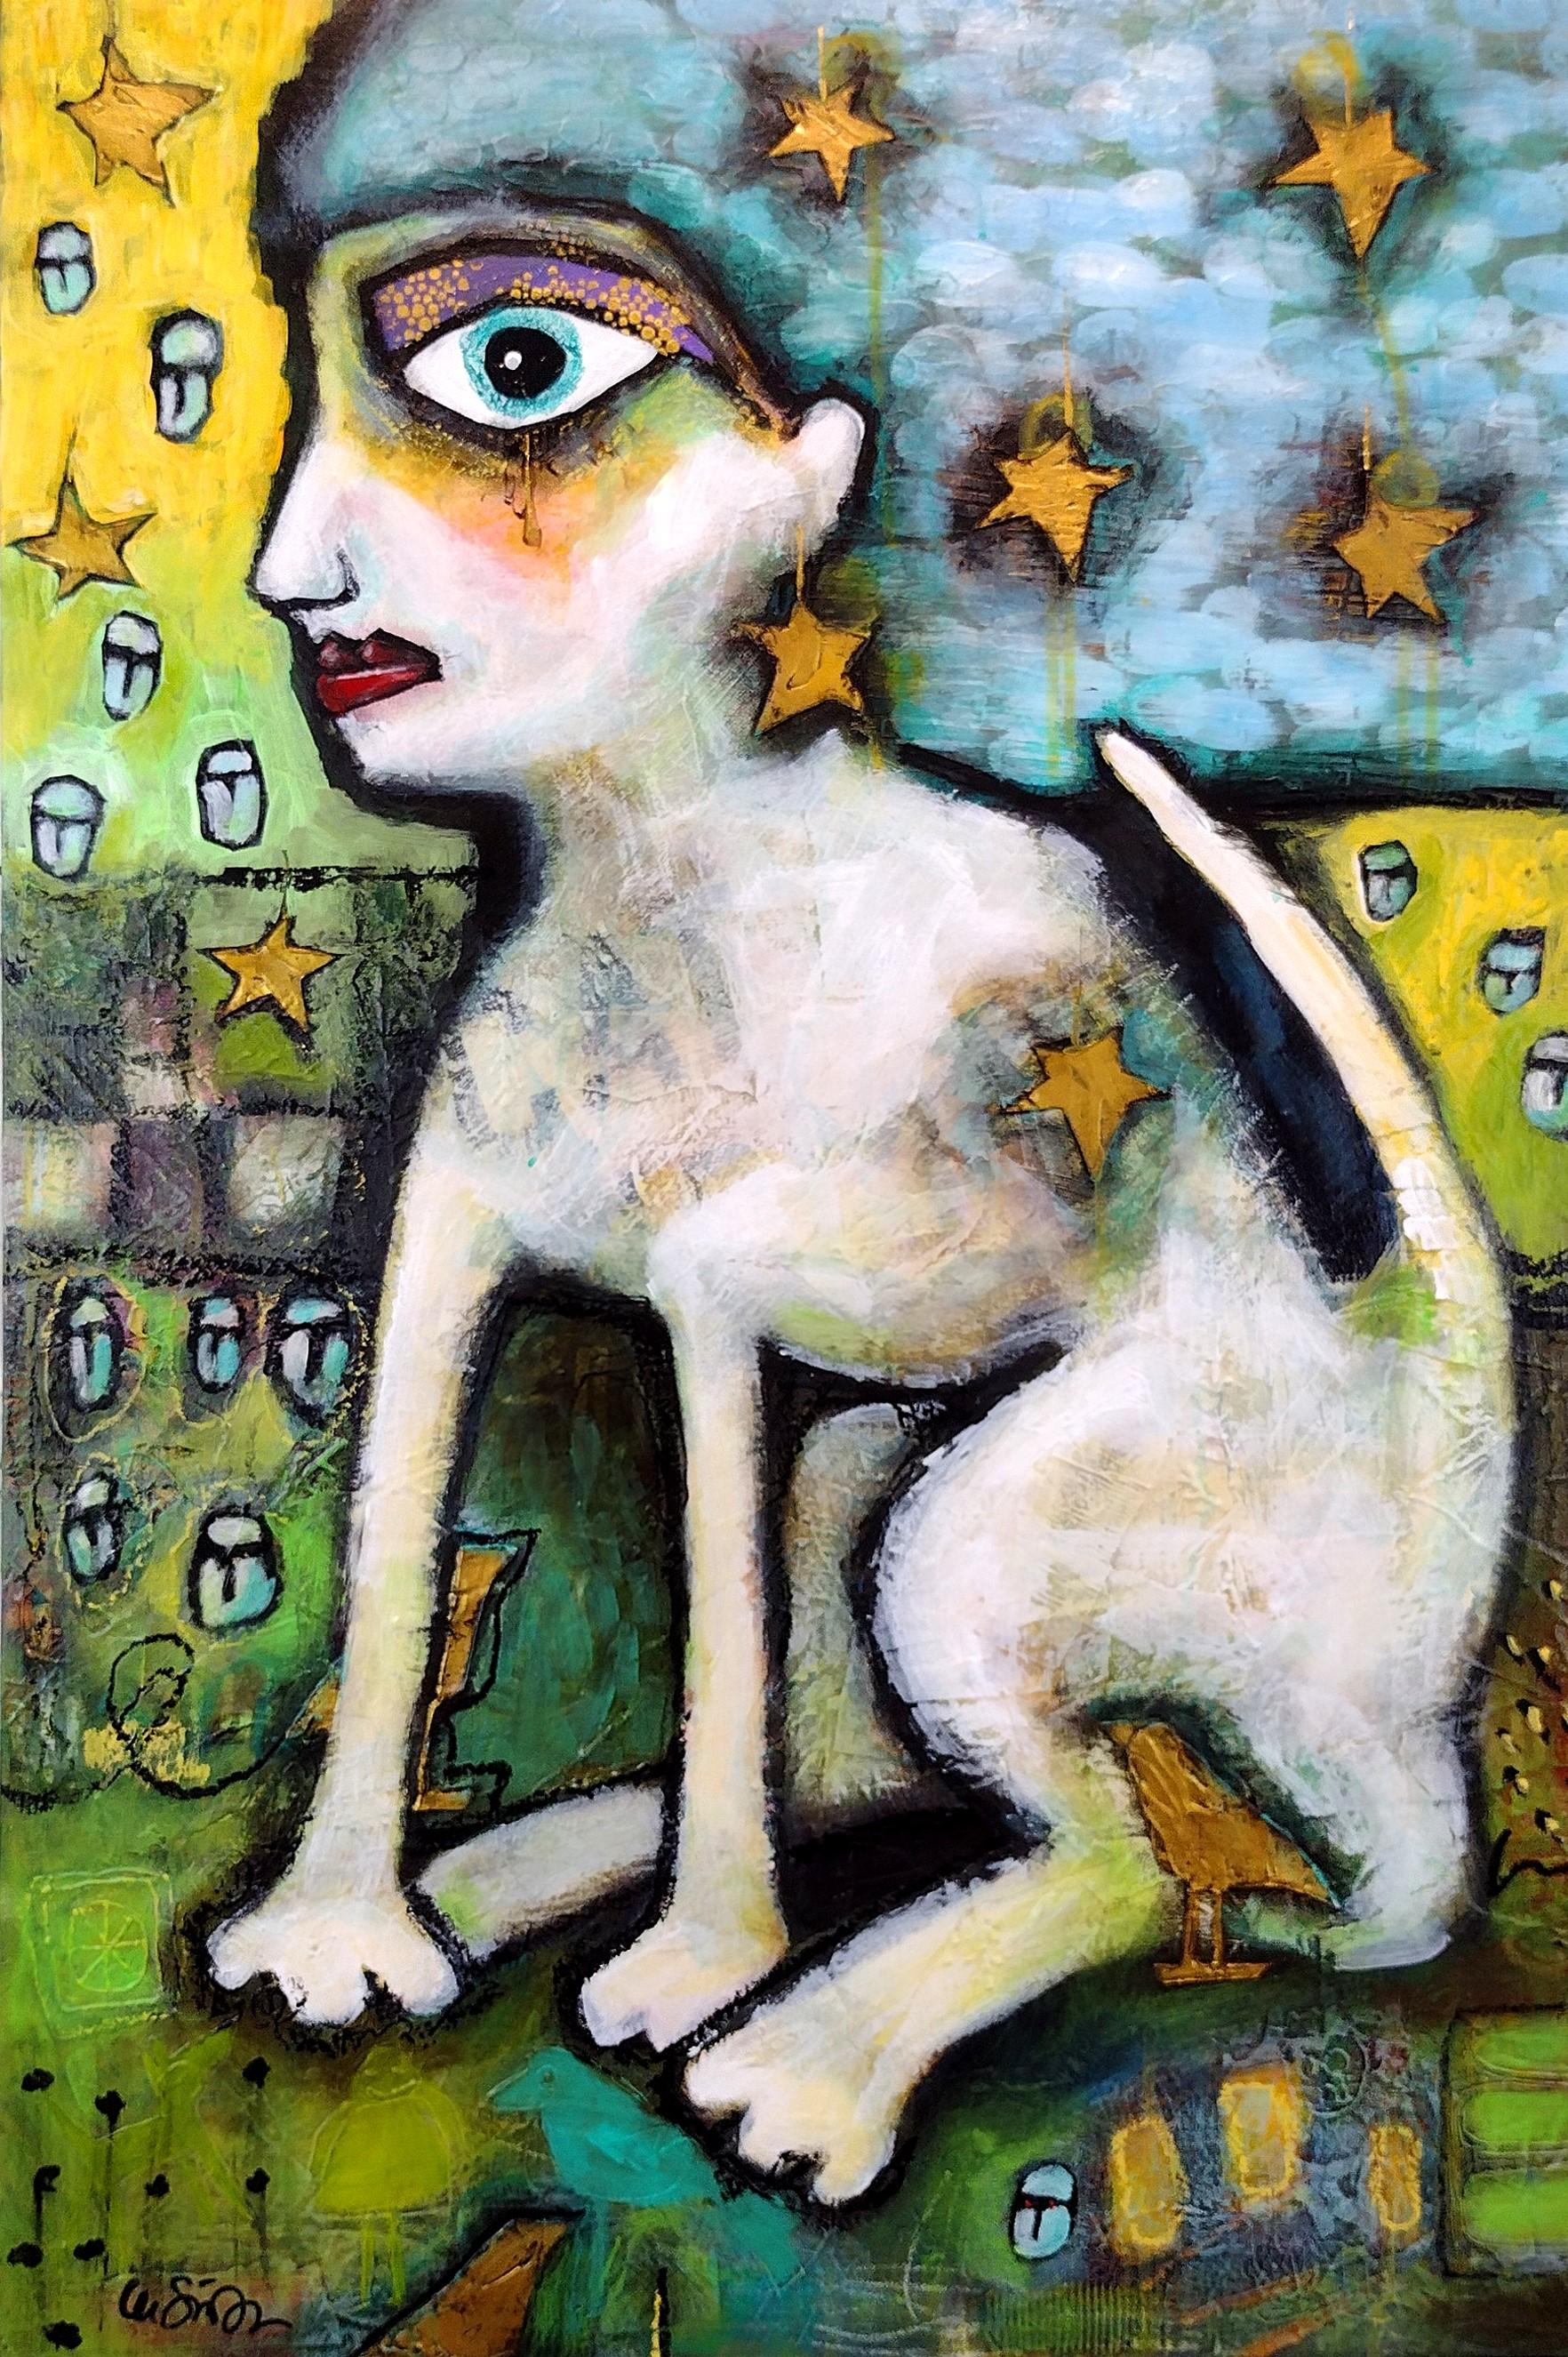 Cat Woman, Original Painting - Mixed Media Art by Lee Smith